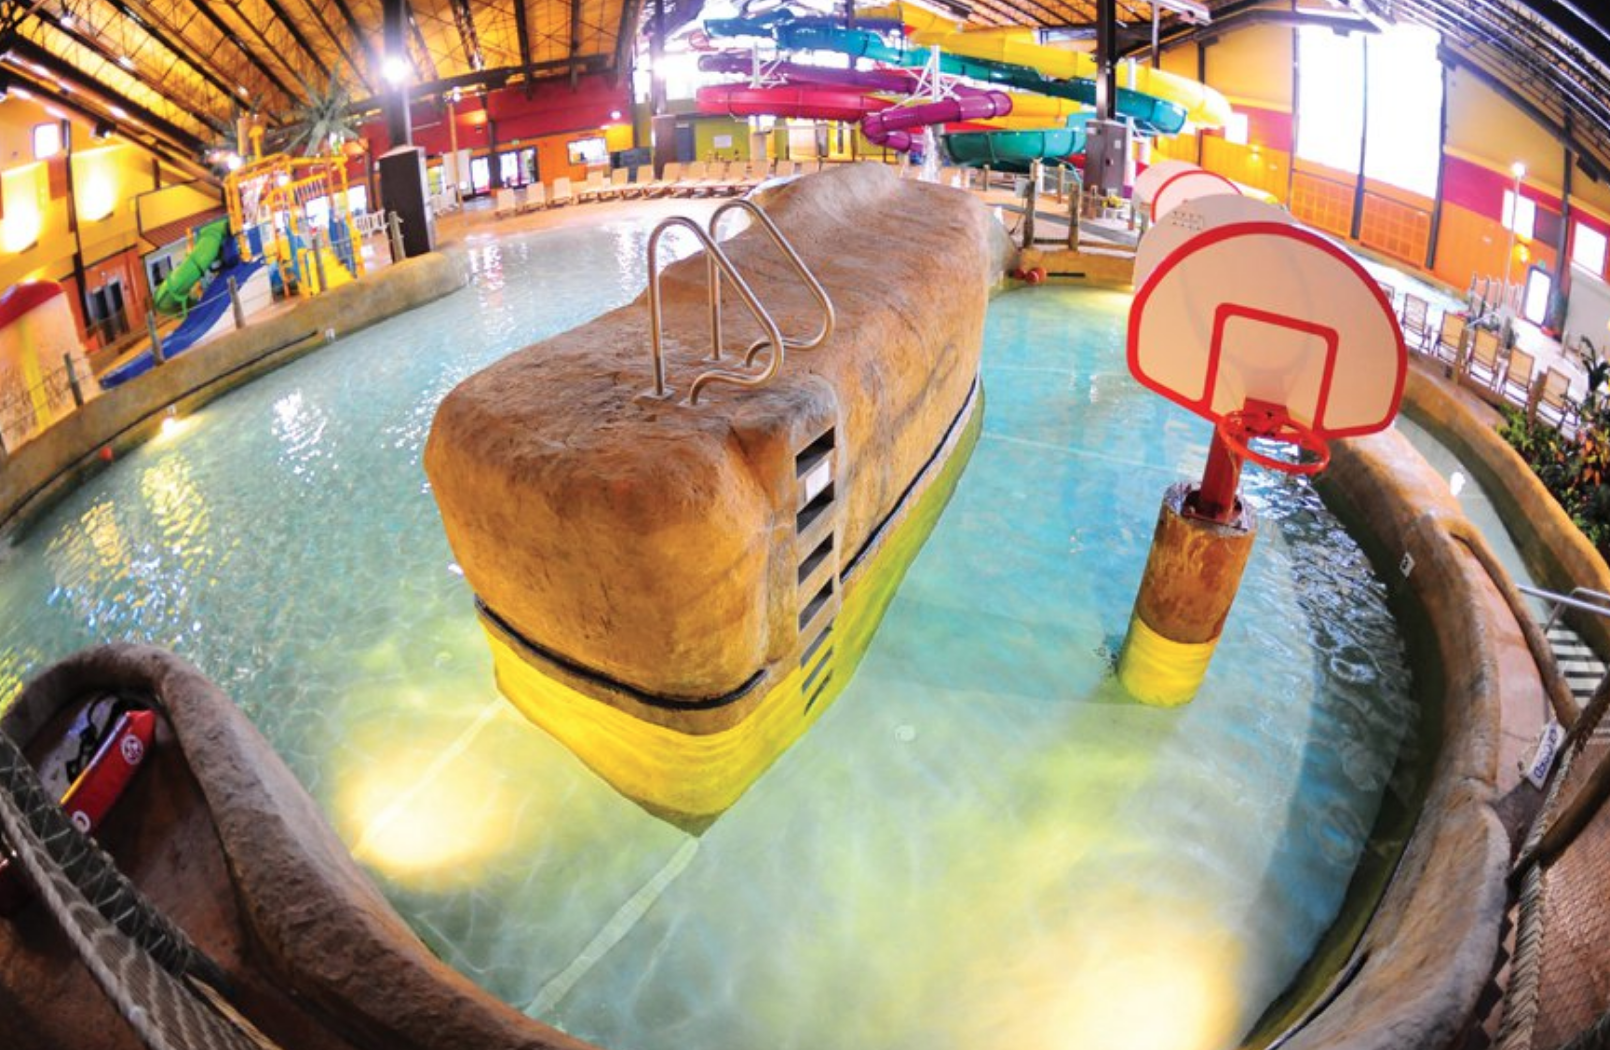 Check Out New Hampshire's Indoor Waterpark, Kahuna Laguna